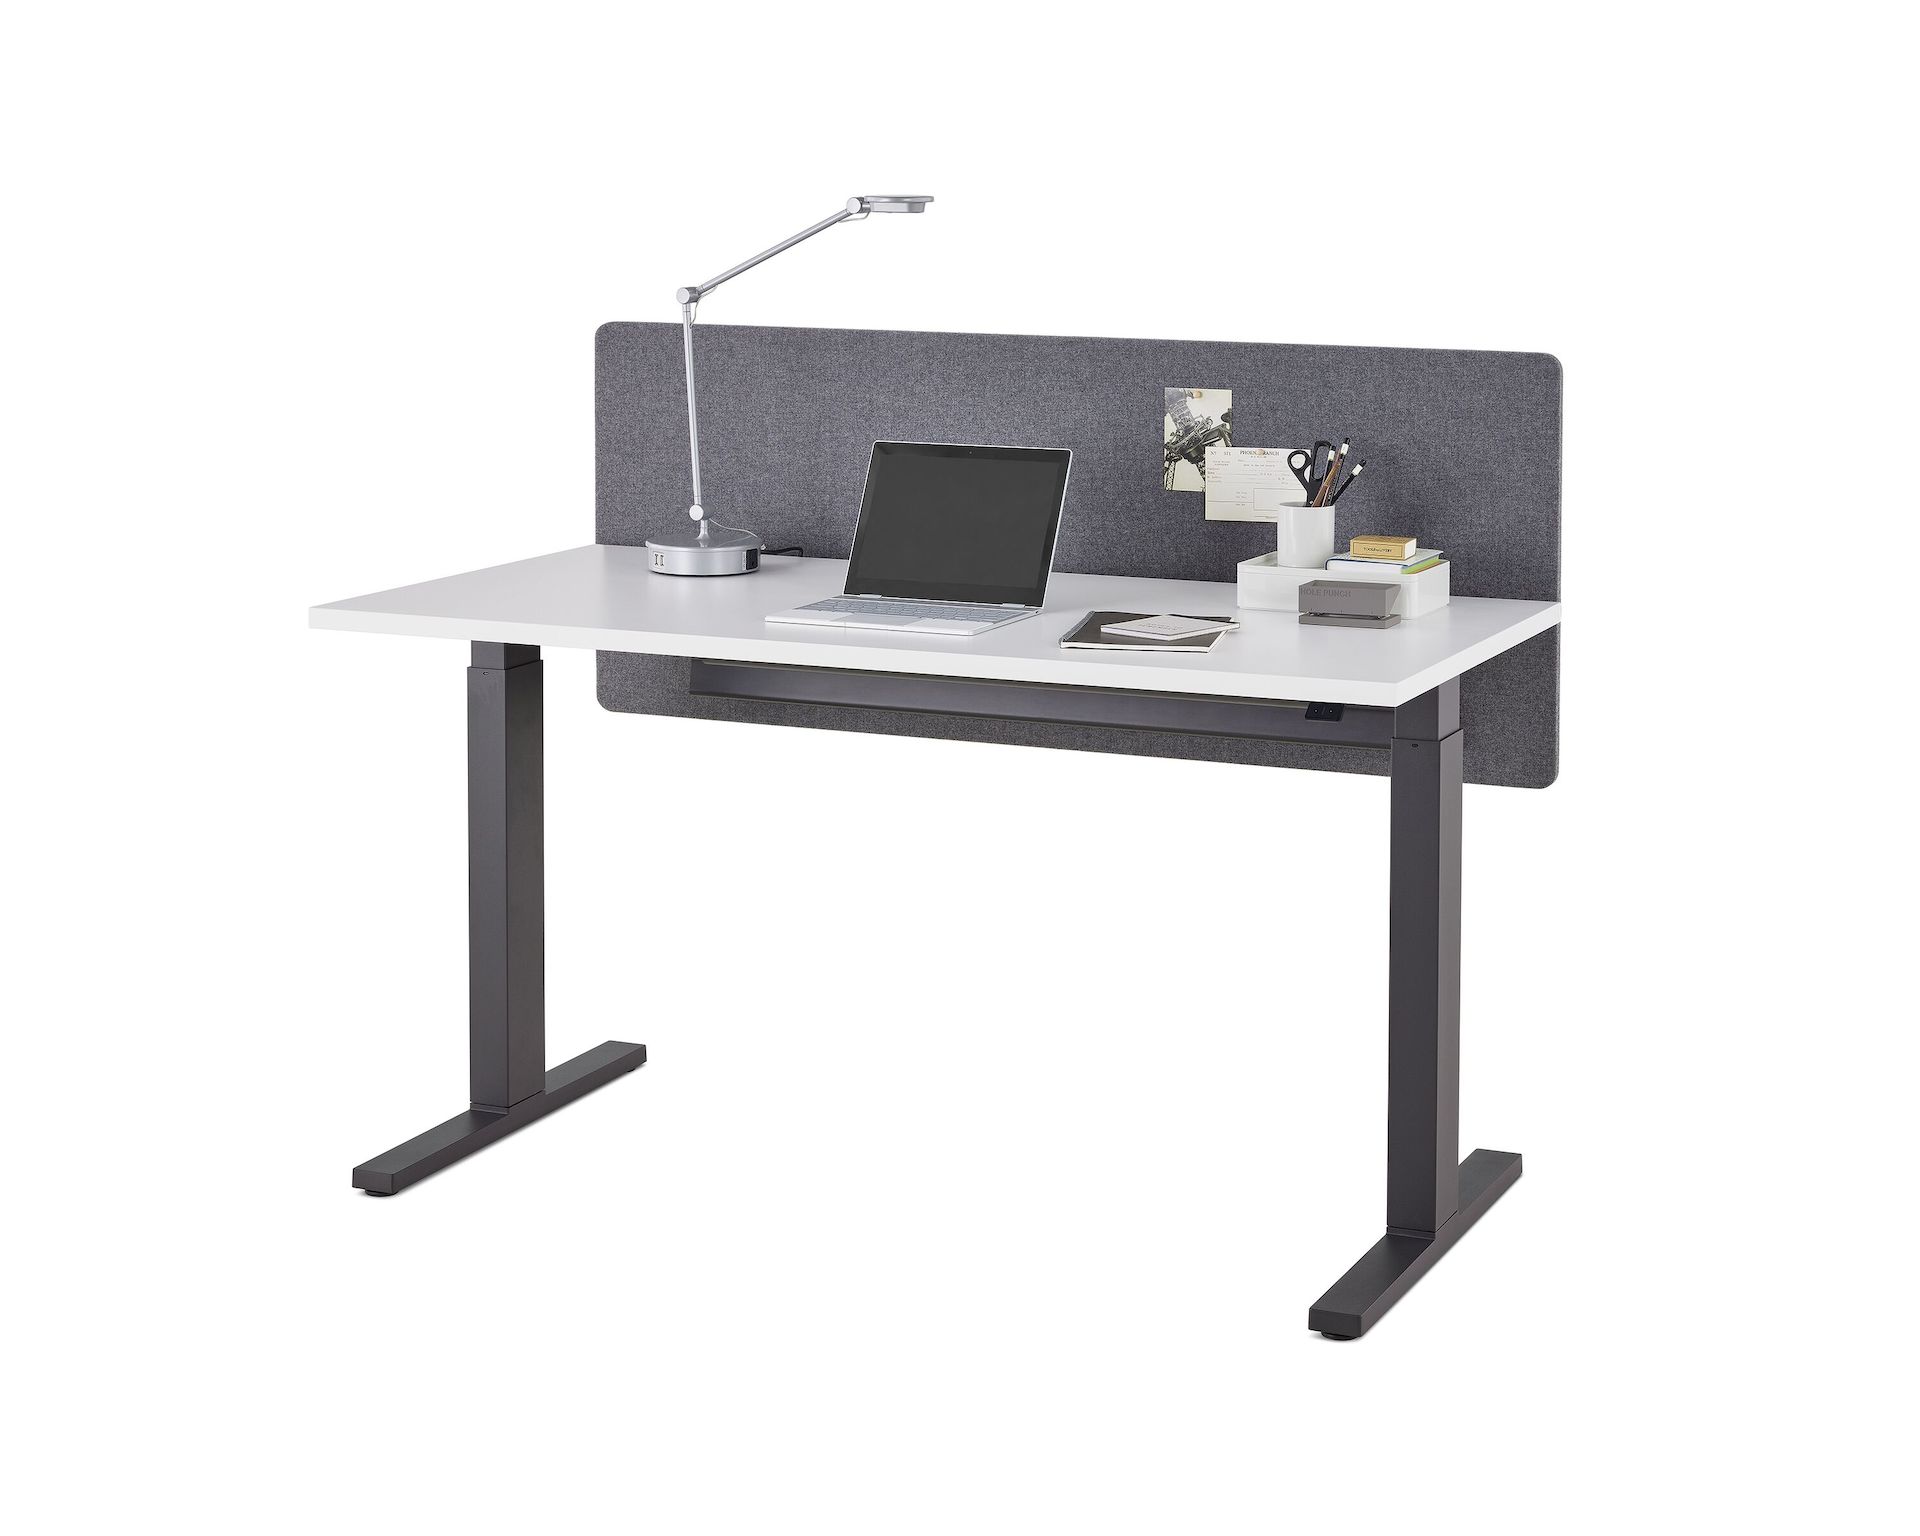  A Motia standing desk at seated height with a dark gray fabric, surface-attached privacy screen. A laptop and desk accessories are on the surface.